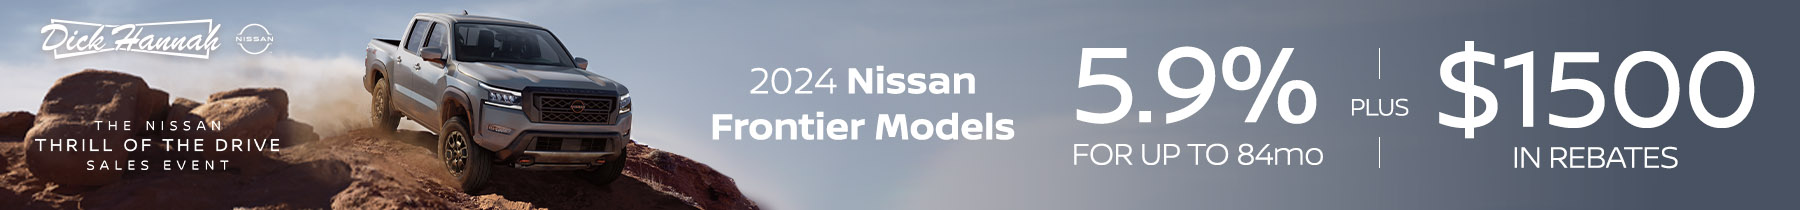 2024 Nissan Frontier (All Models) -   5.9% up to 84 months  PLUS  $1500 in Rebates!